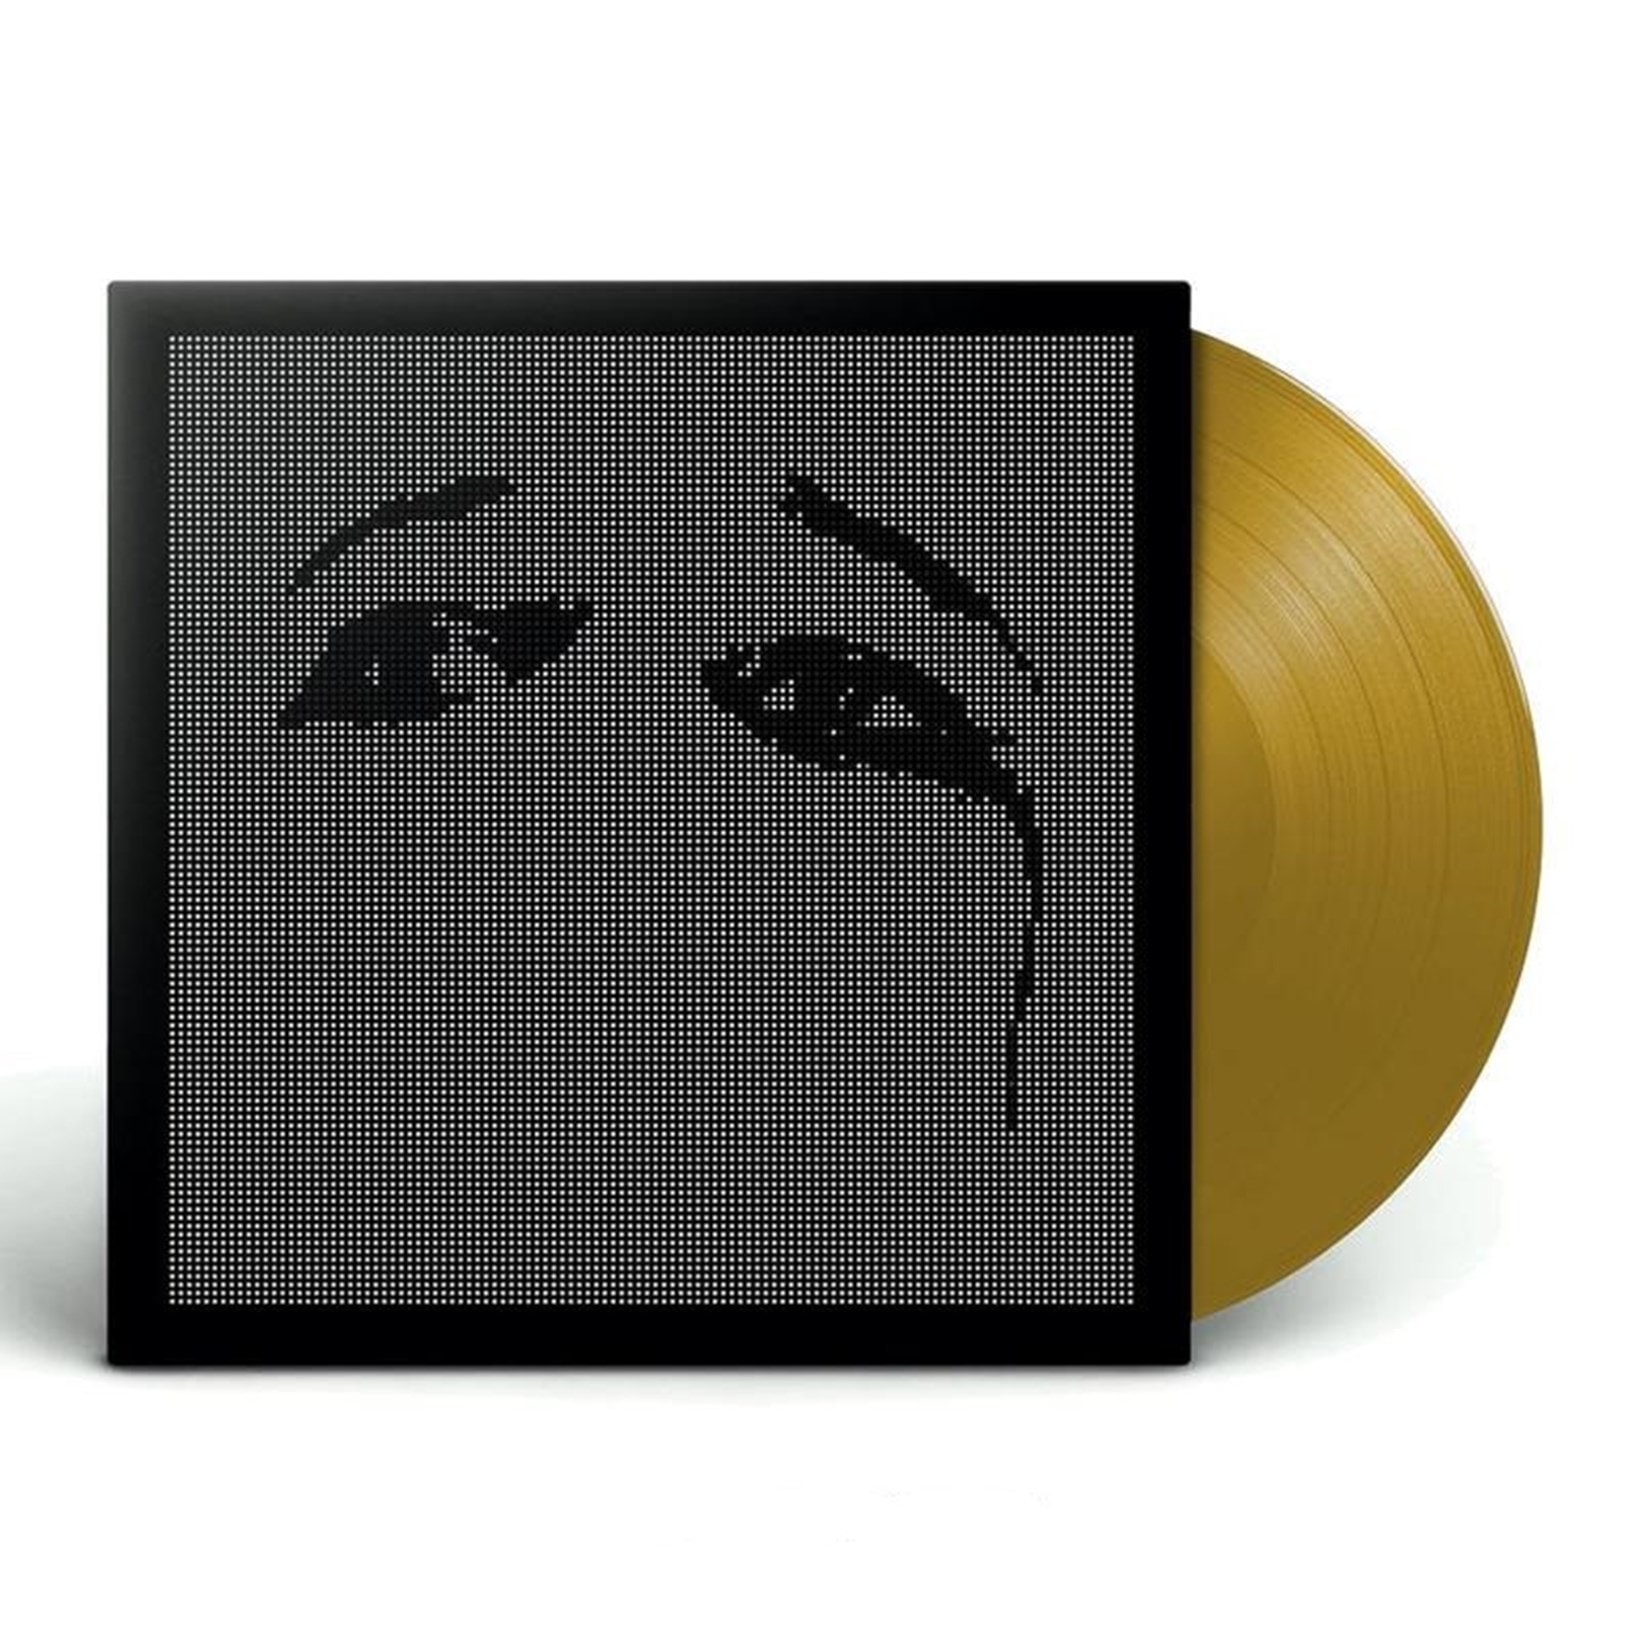 Ohms - Limited Edition Gold Vinyl